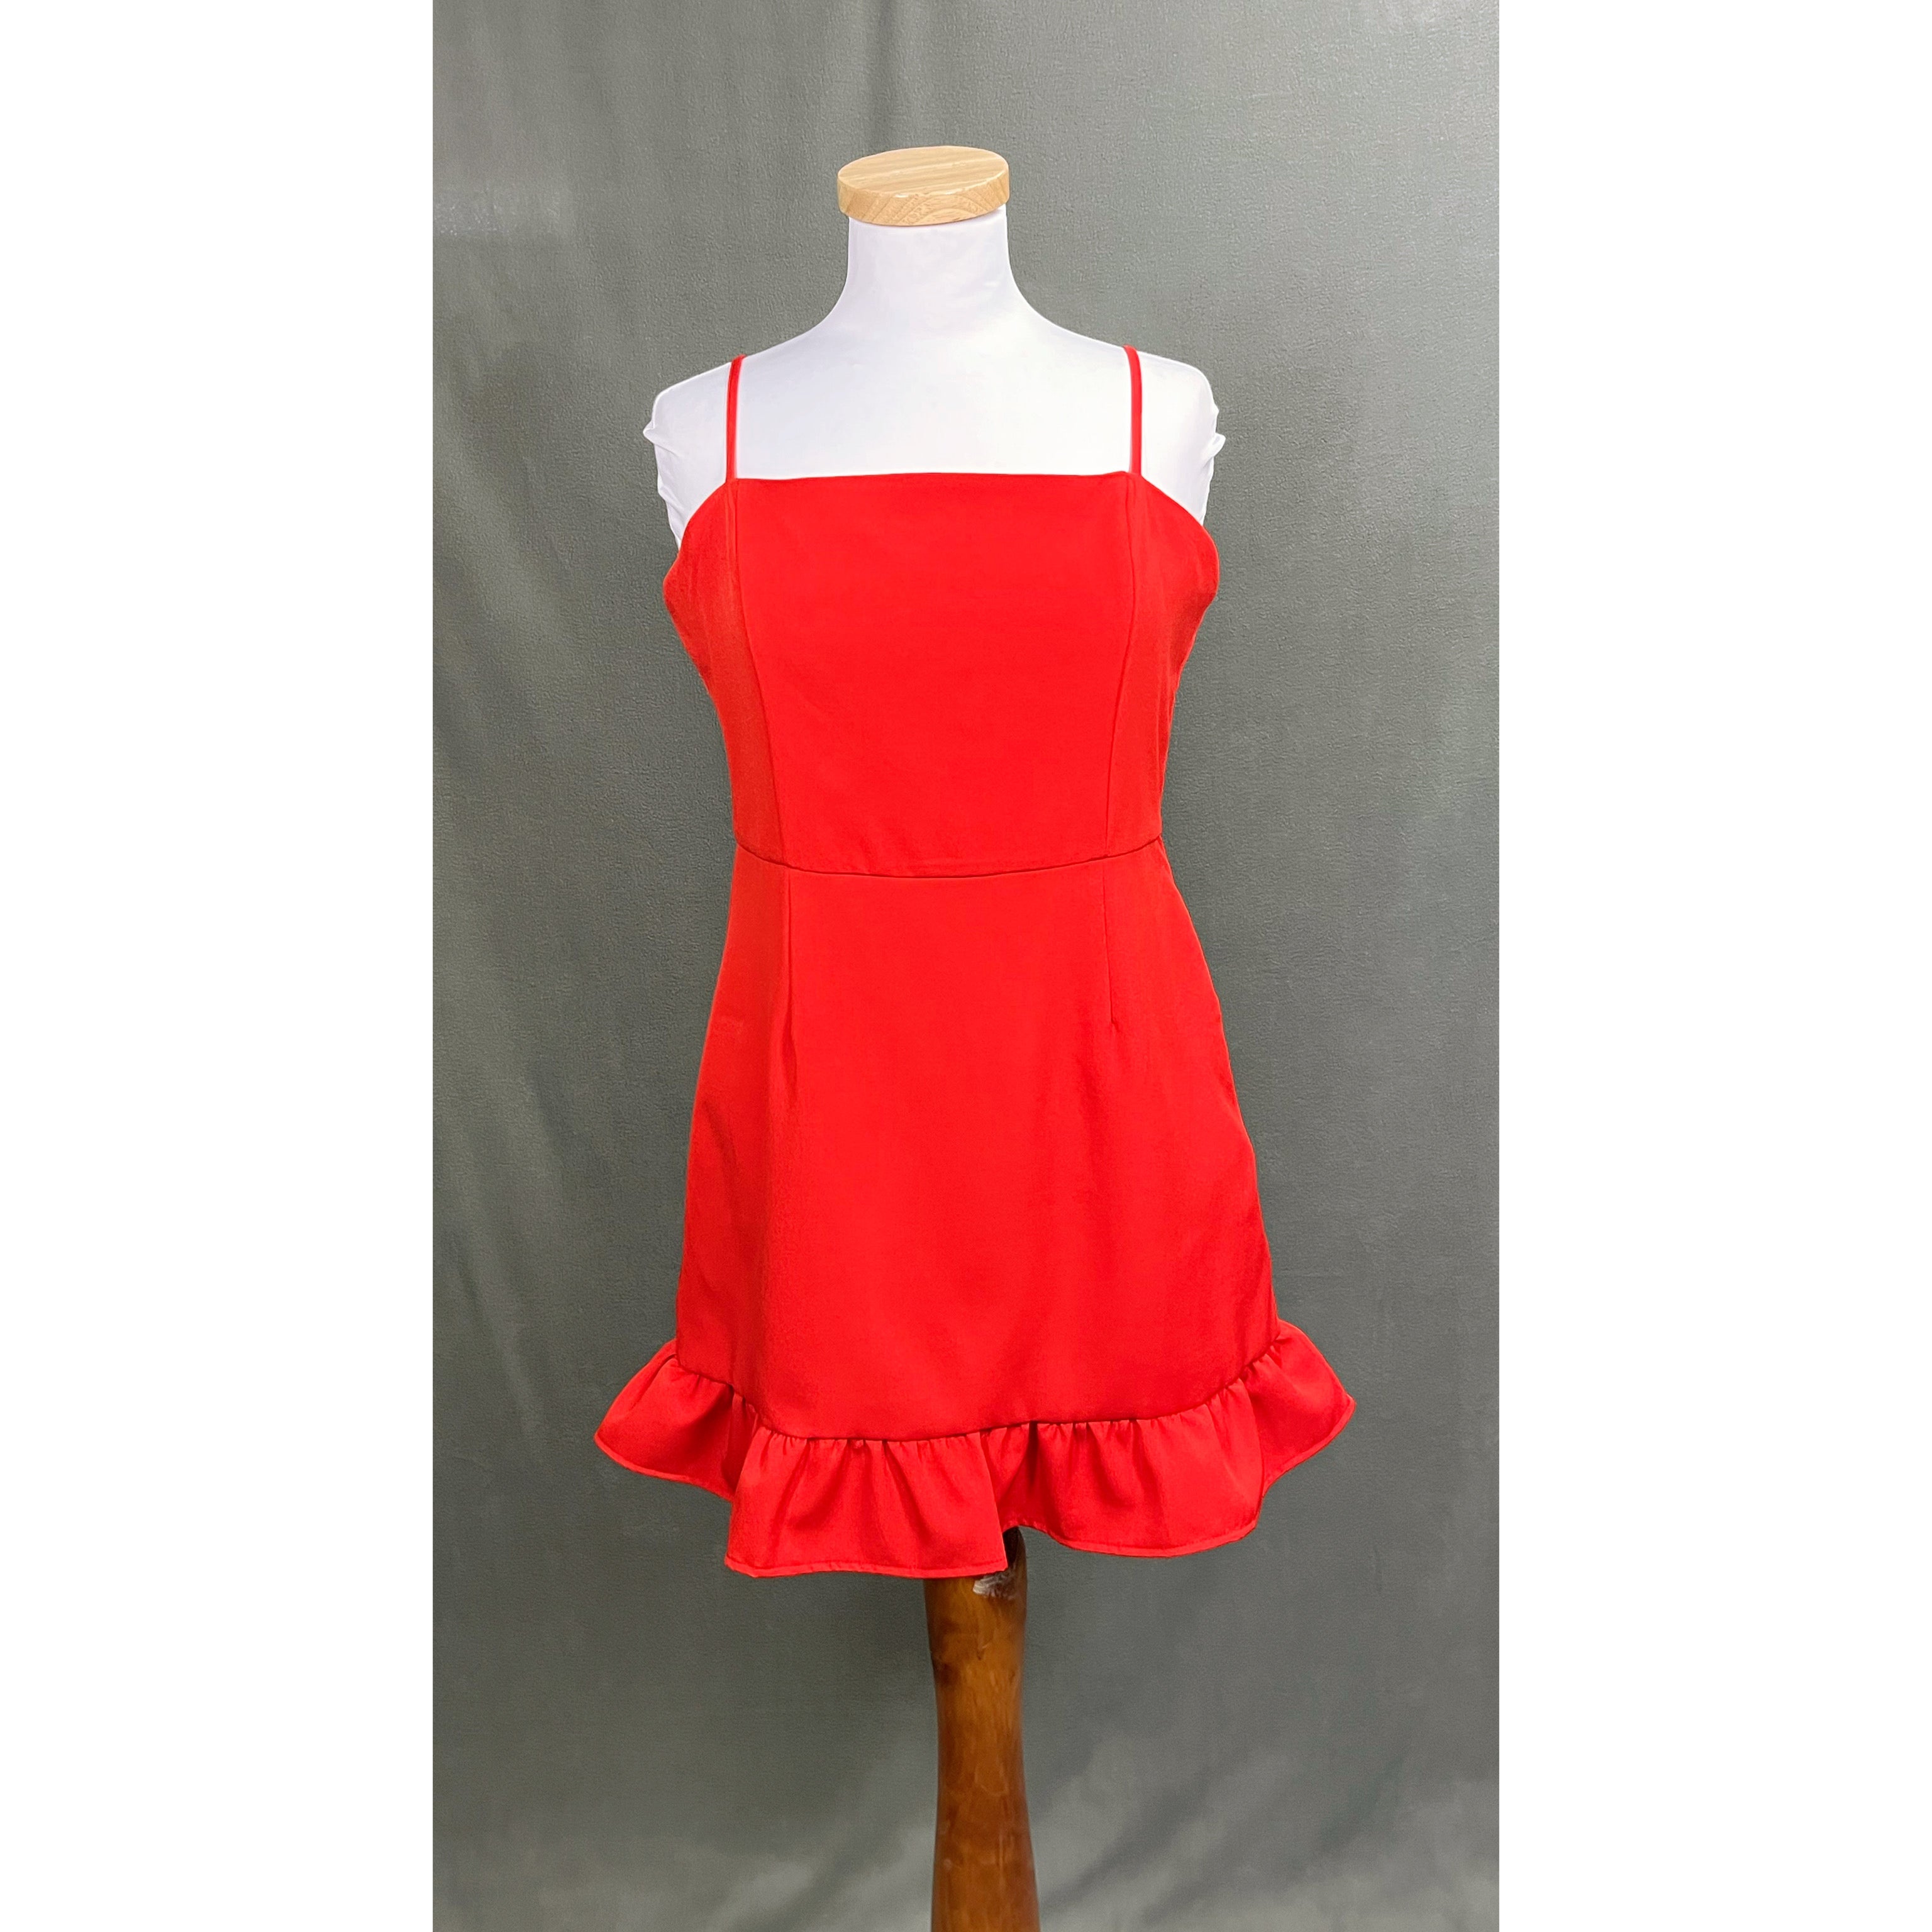 TCEC red dress, sizes M & L, NEW WITH TAGS!